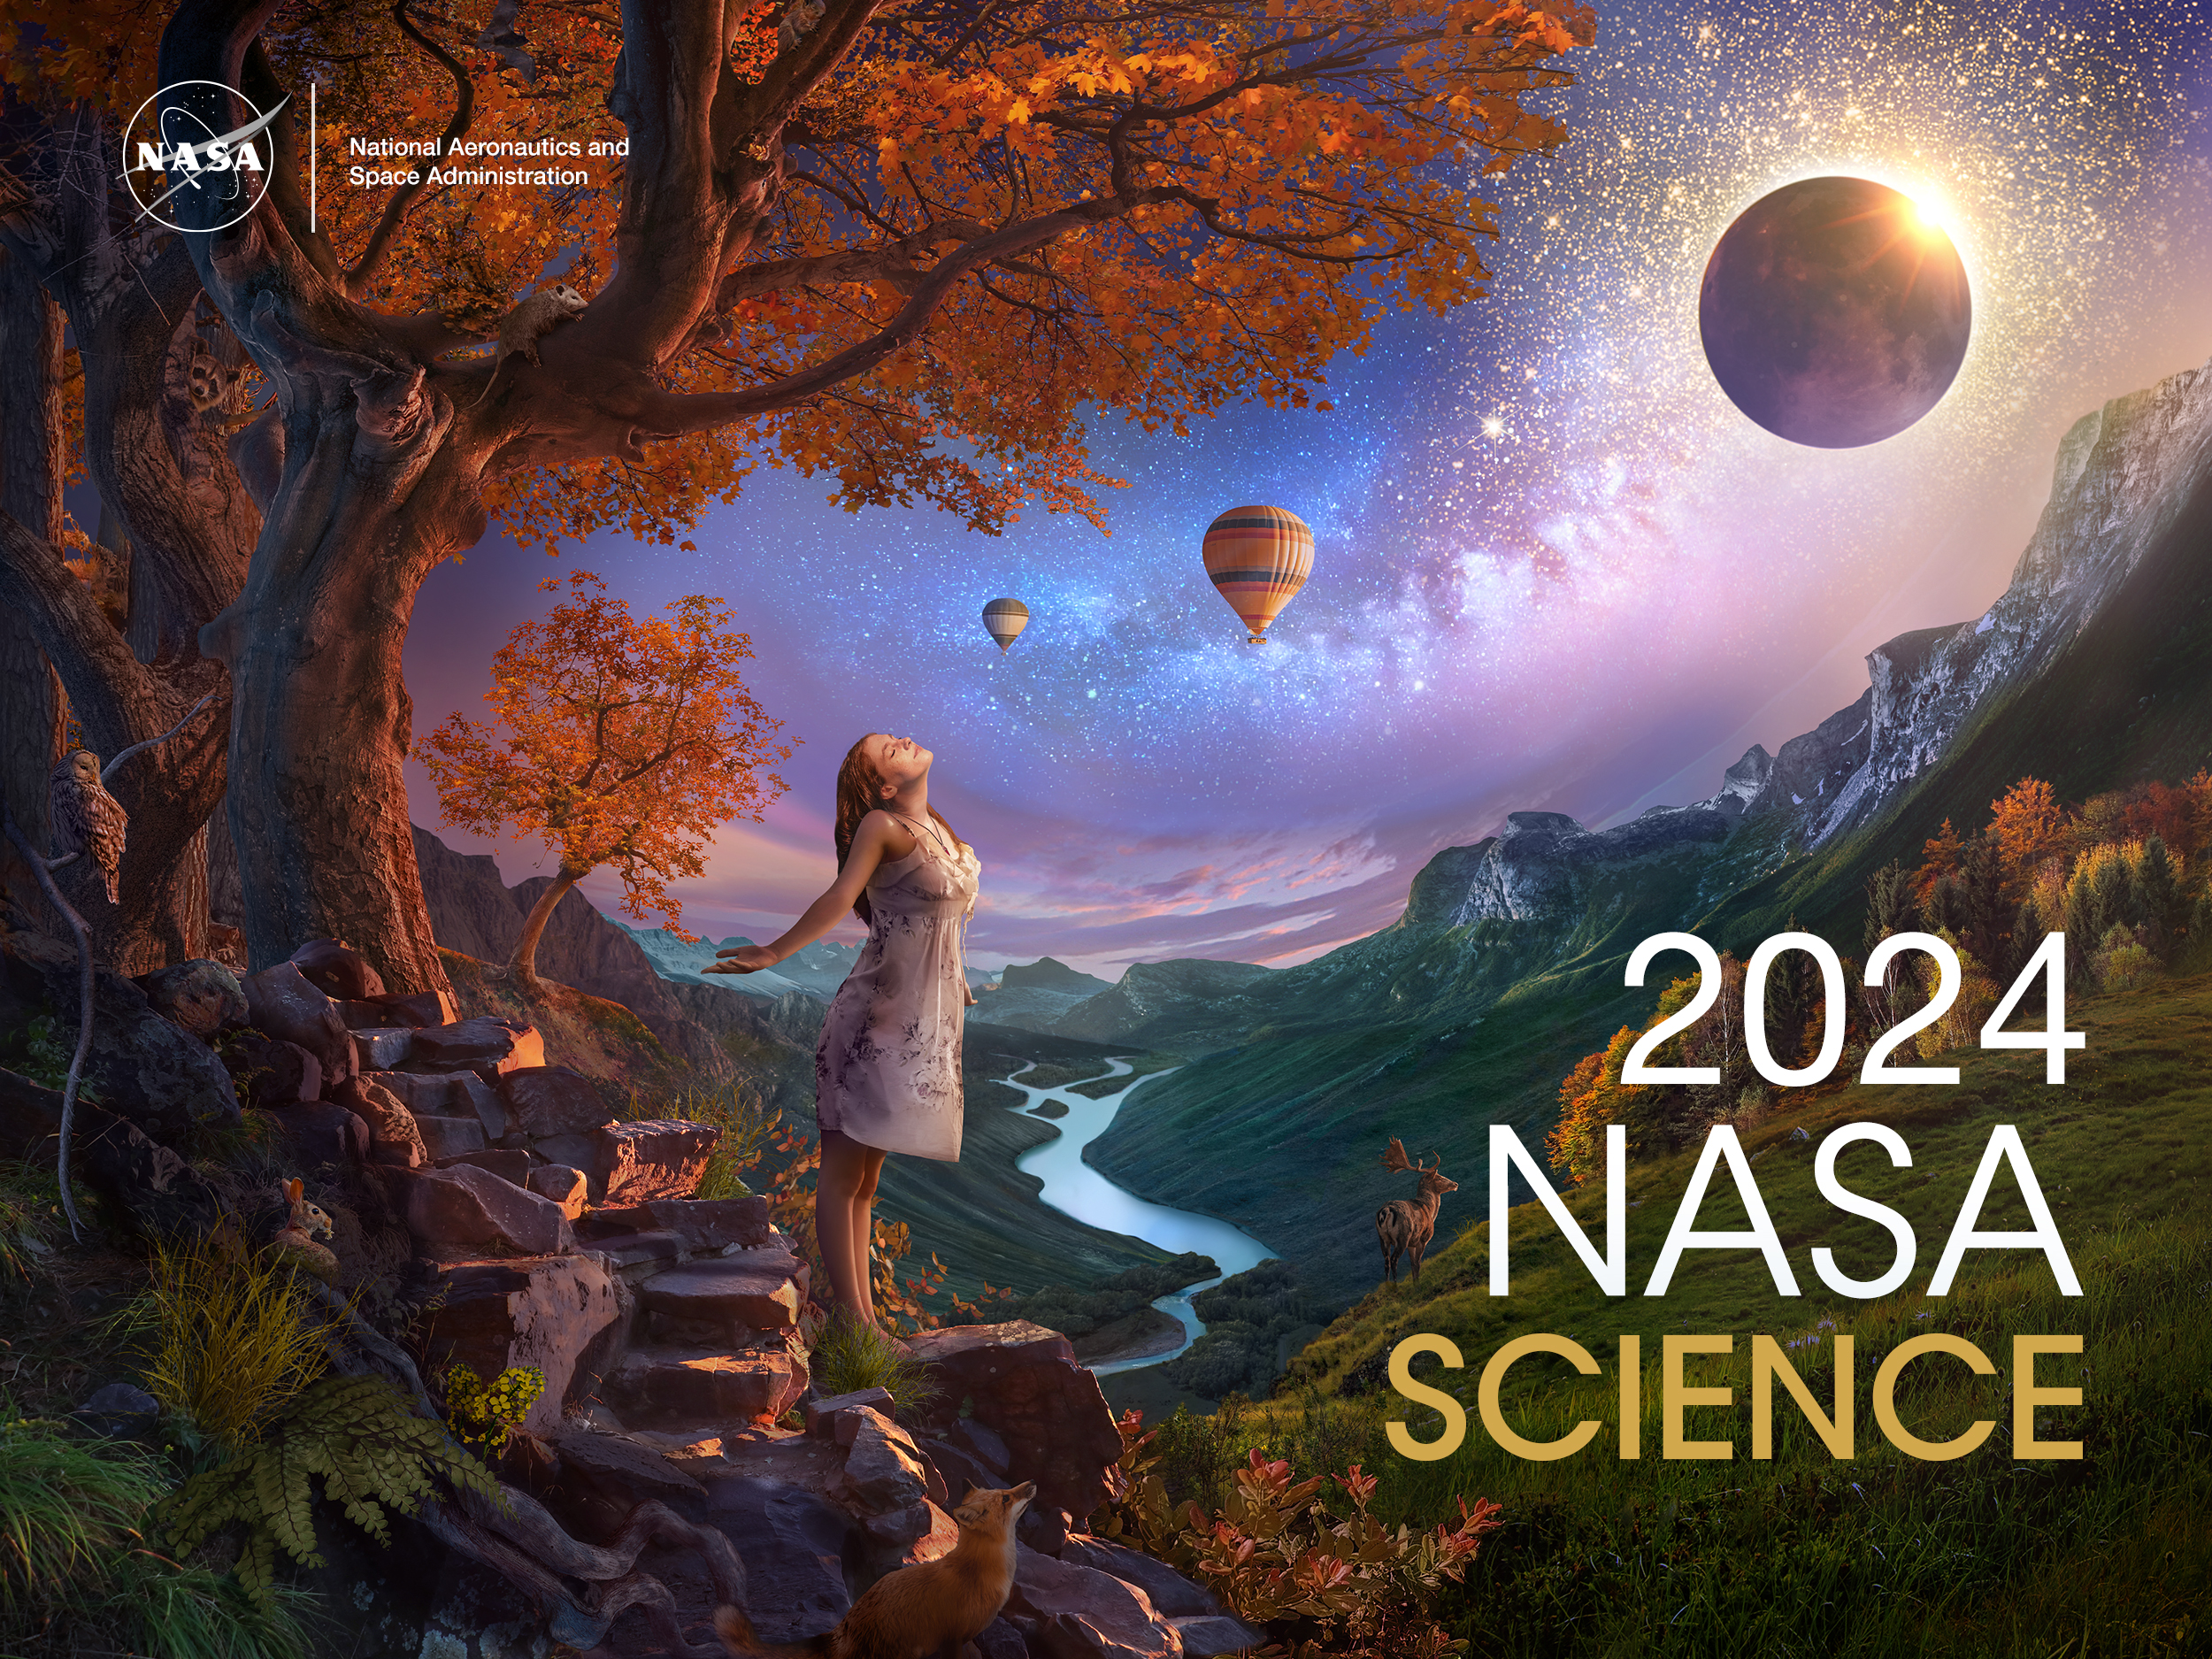 An artist’s concept of a landscape, composed of dusky purples, oranges, golds, and greens. In the left foreground, a young woman wearing a white dress basks in the rays of a solar eclipse. She stands under a bright orange fall tree rooted to the side of a rocky mountain trail. The scene overlooks a valley with a river running through the middle towards distant hazy blue mountains. Nocturnal animals – including a fox, owl, possum, and bat – emerge to investigate the sudden onset of night. A deer stands on a grassy knoll at left in front of a line of fall colored trees. The Milky Way trails across the sky, leading up from the young woman to the eclipse and glittering stars at top right. Two hot air balloons float in the distance. This concept was created in celebration of the Heliophysics Big Year, which is bookended by the Annular Eclipse in October of 2023 and the Total Solar Eclipse in April of 2024.